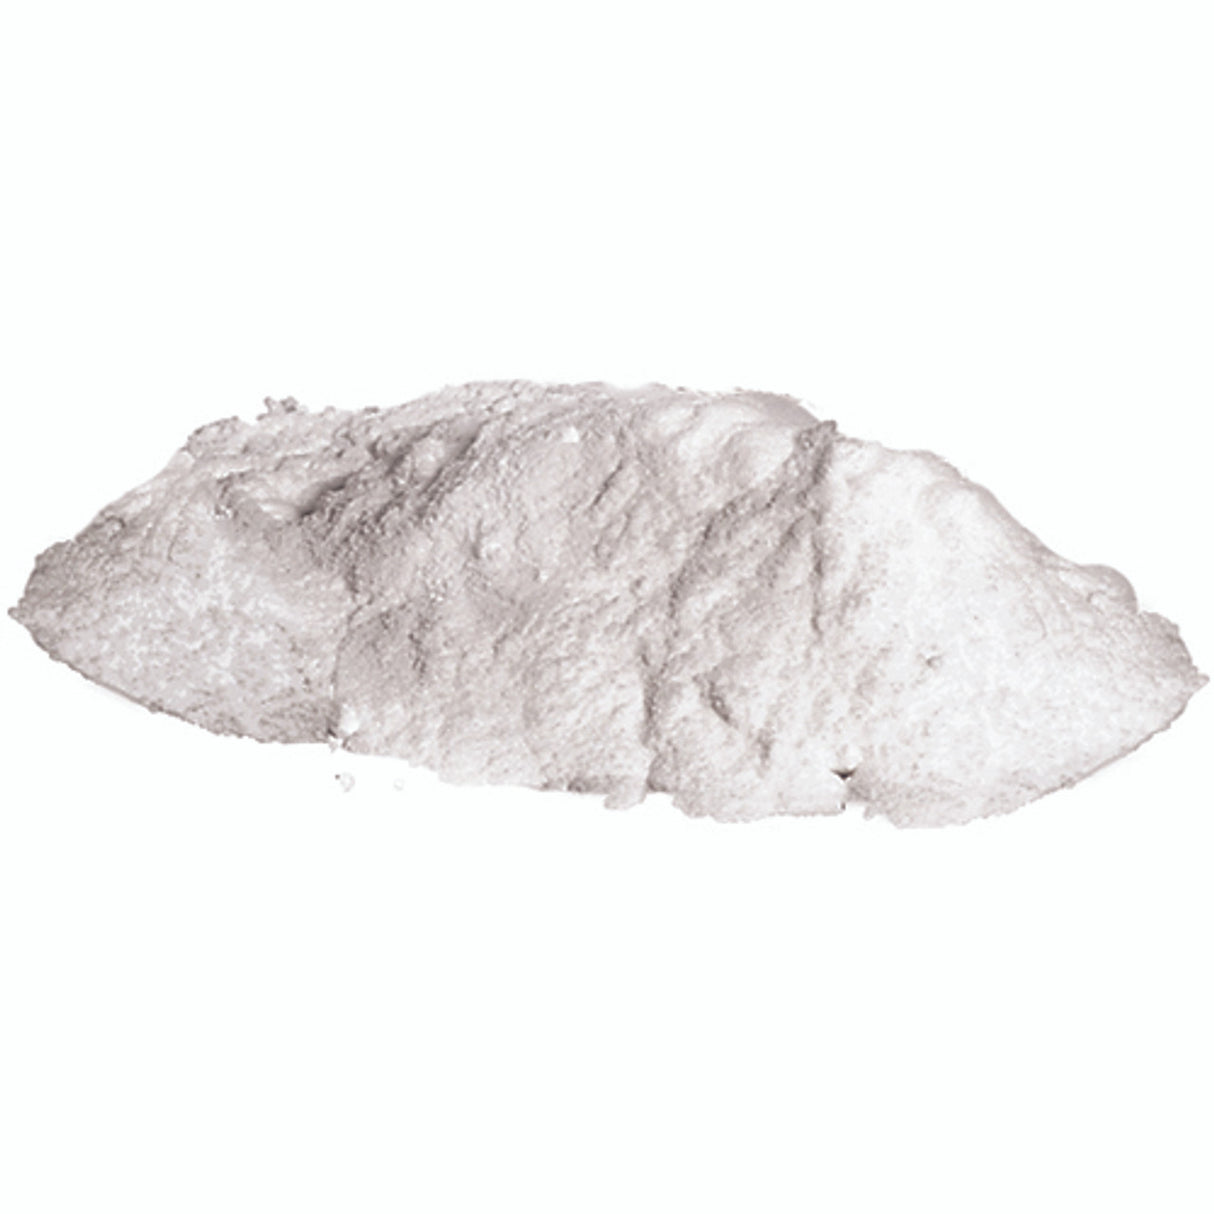 Soap Powder for Carbon Steel Shot, 5 lbs.